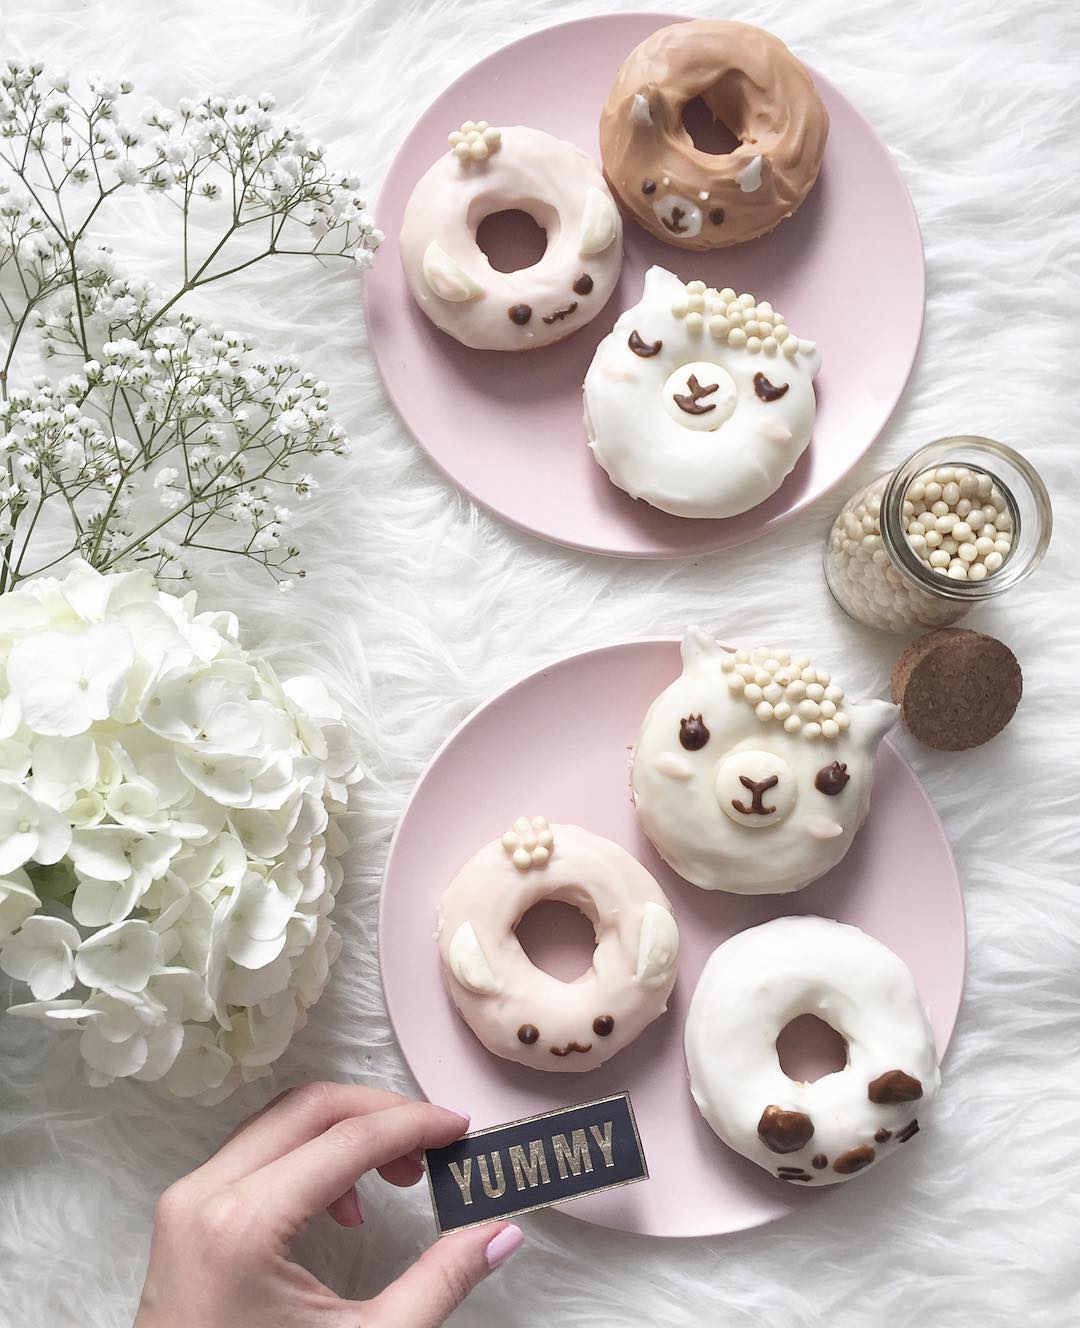 50+ Lovely Llama Crafts, Printables, SVG's DIY's, Food and Gift Ideas: Llama Donuts from Burberrie Jam on Instagram